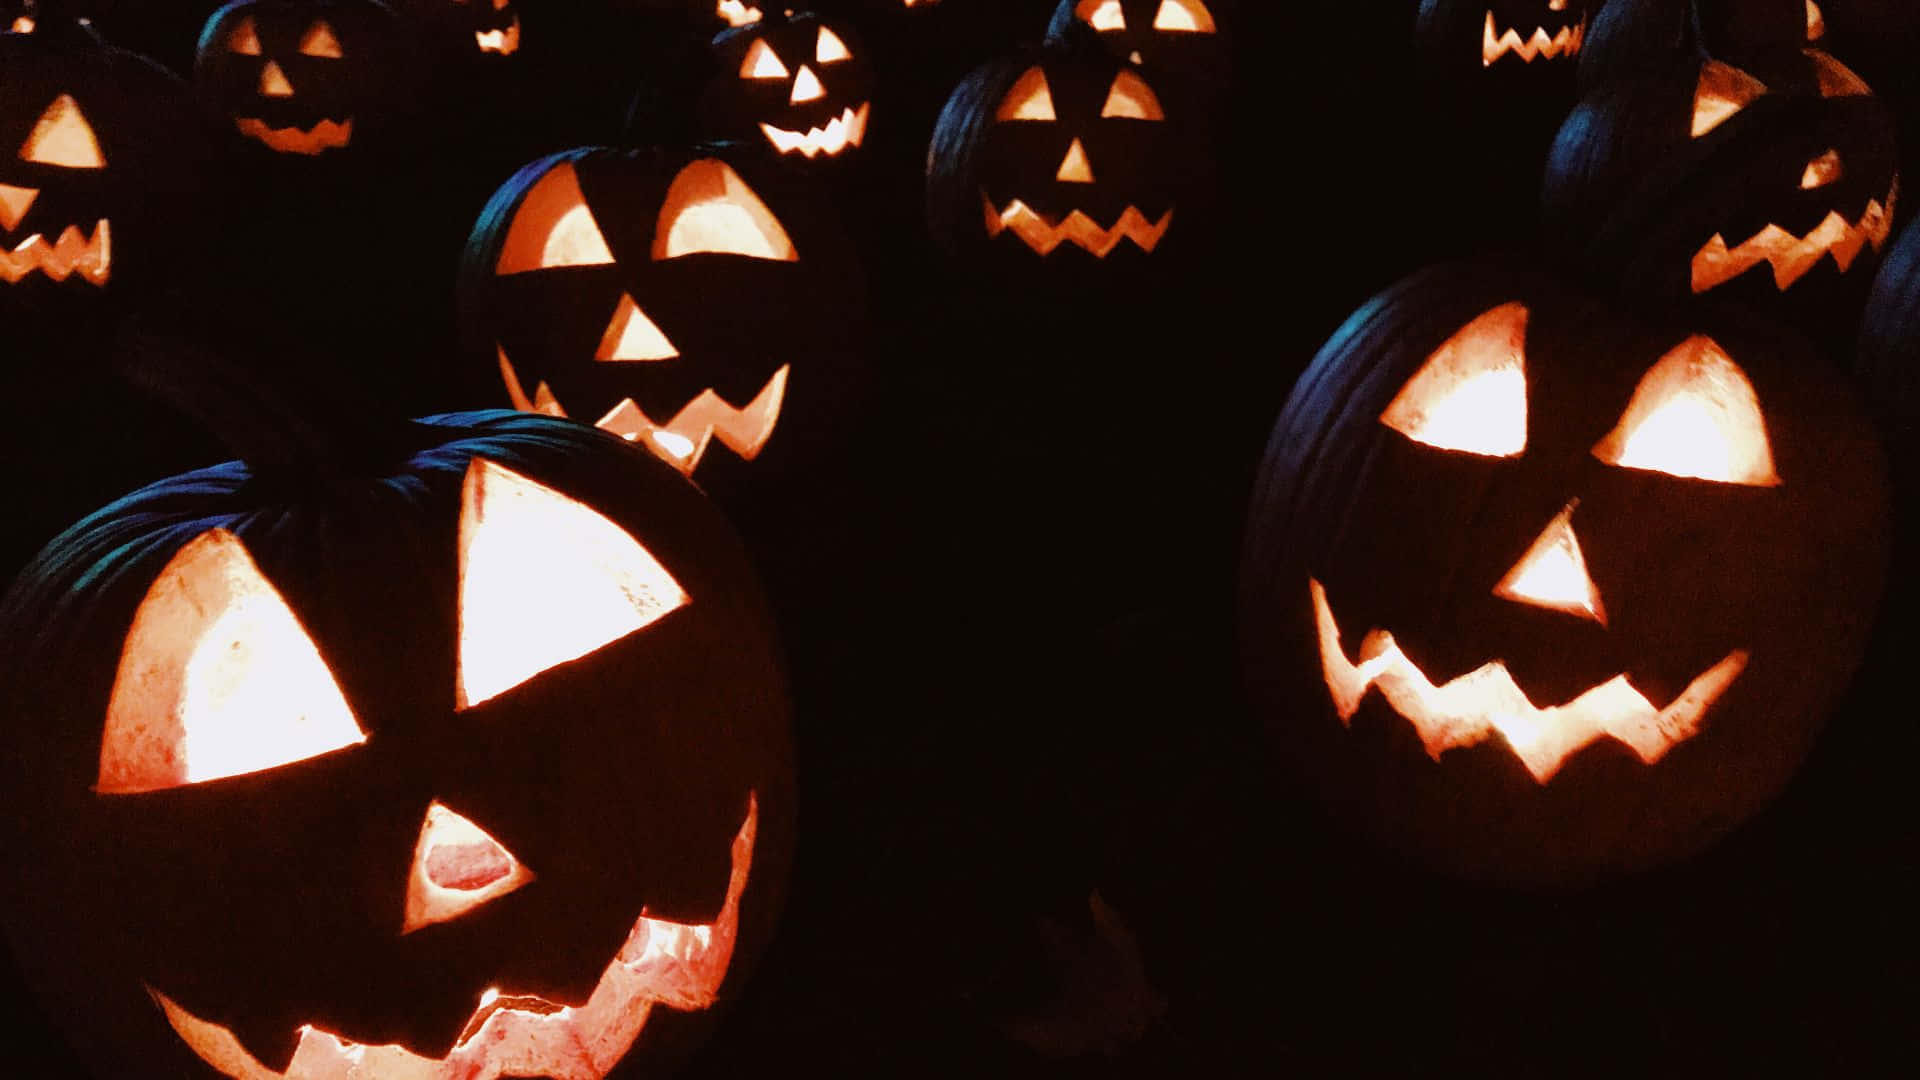 A Group Of Pumpkins With Faces Lit Up In The Dark